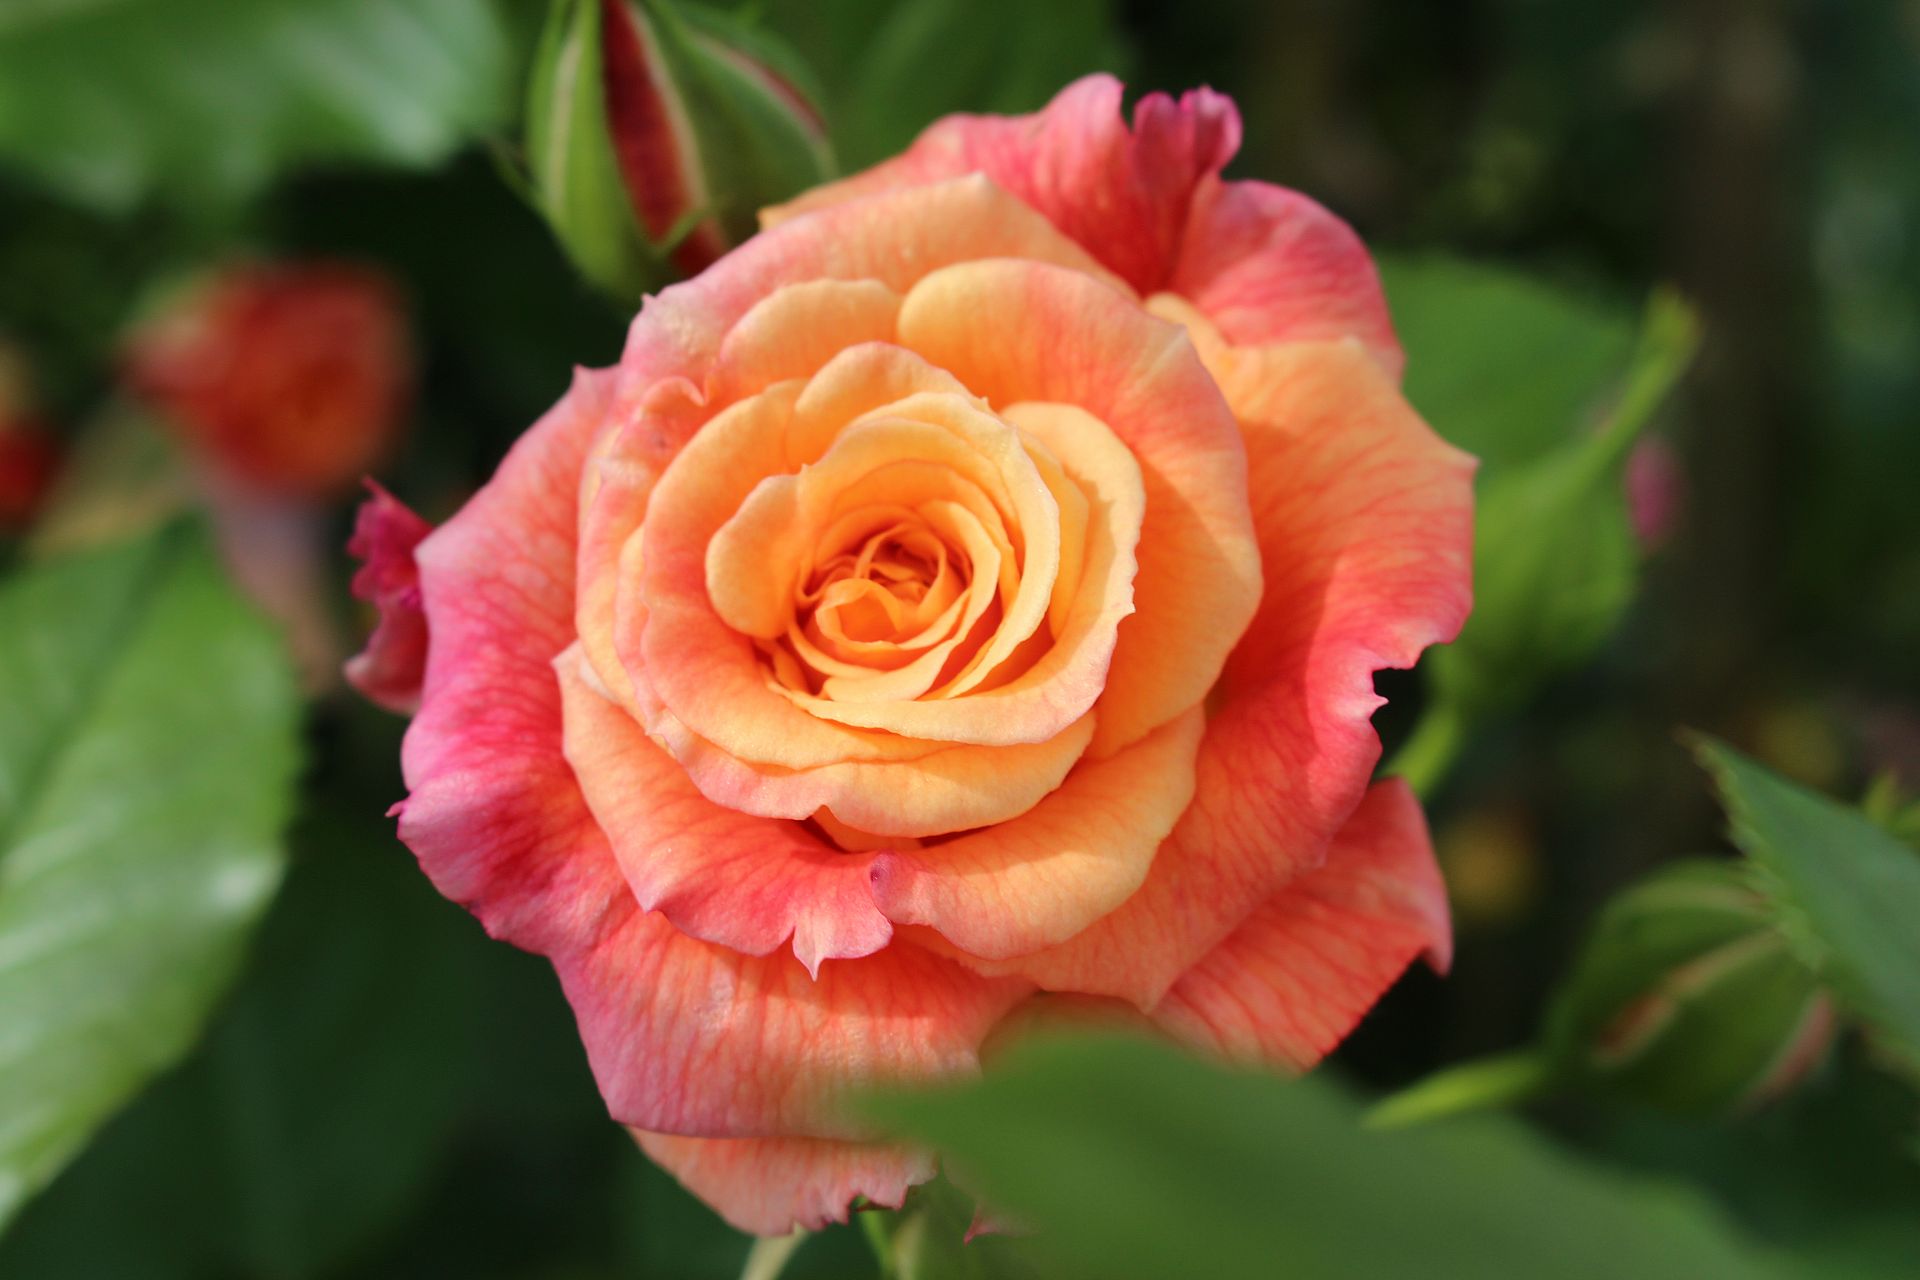 The rose collections - from historical to modern species